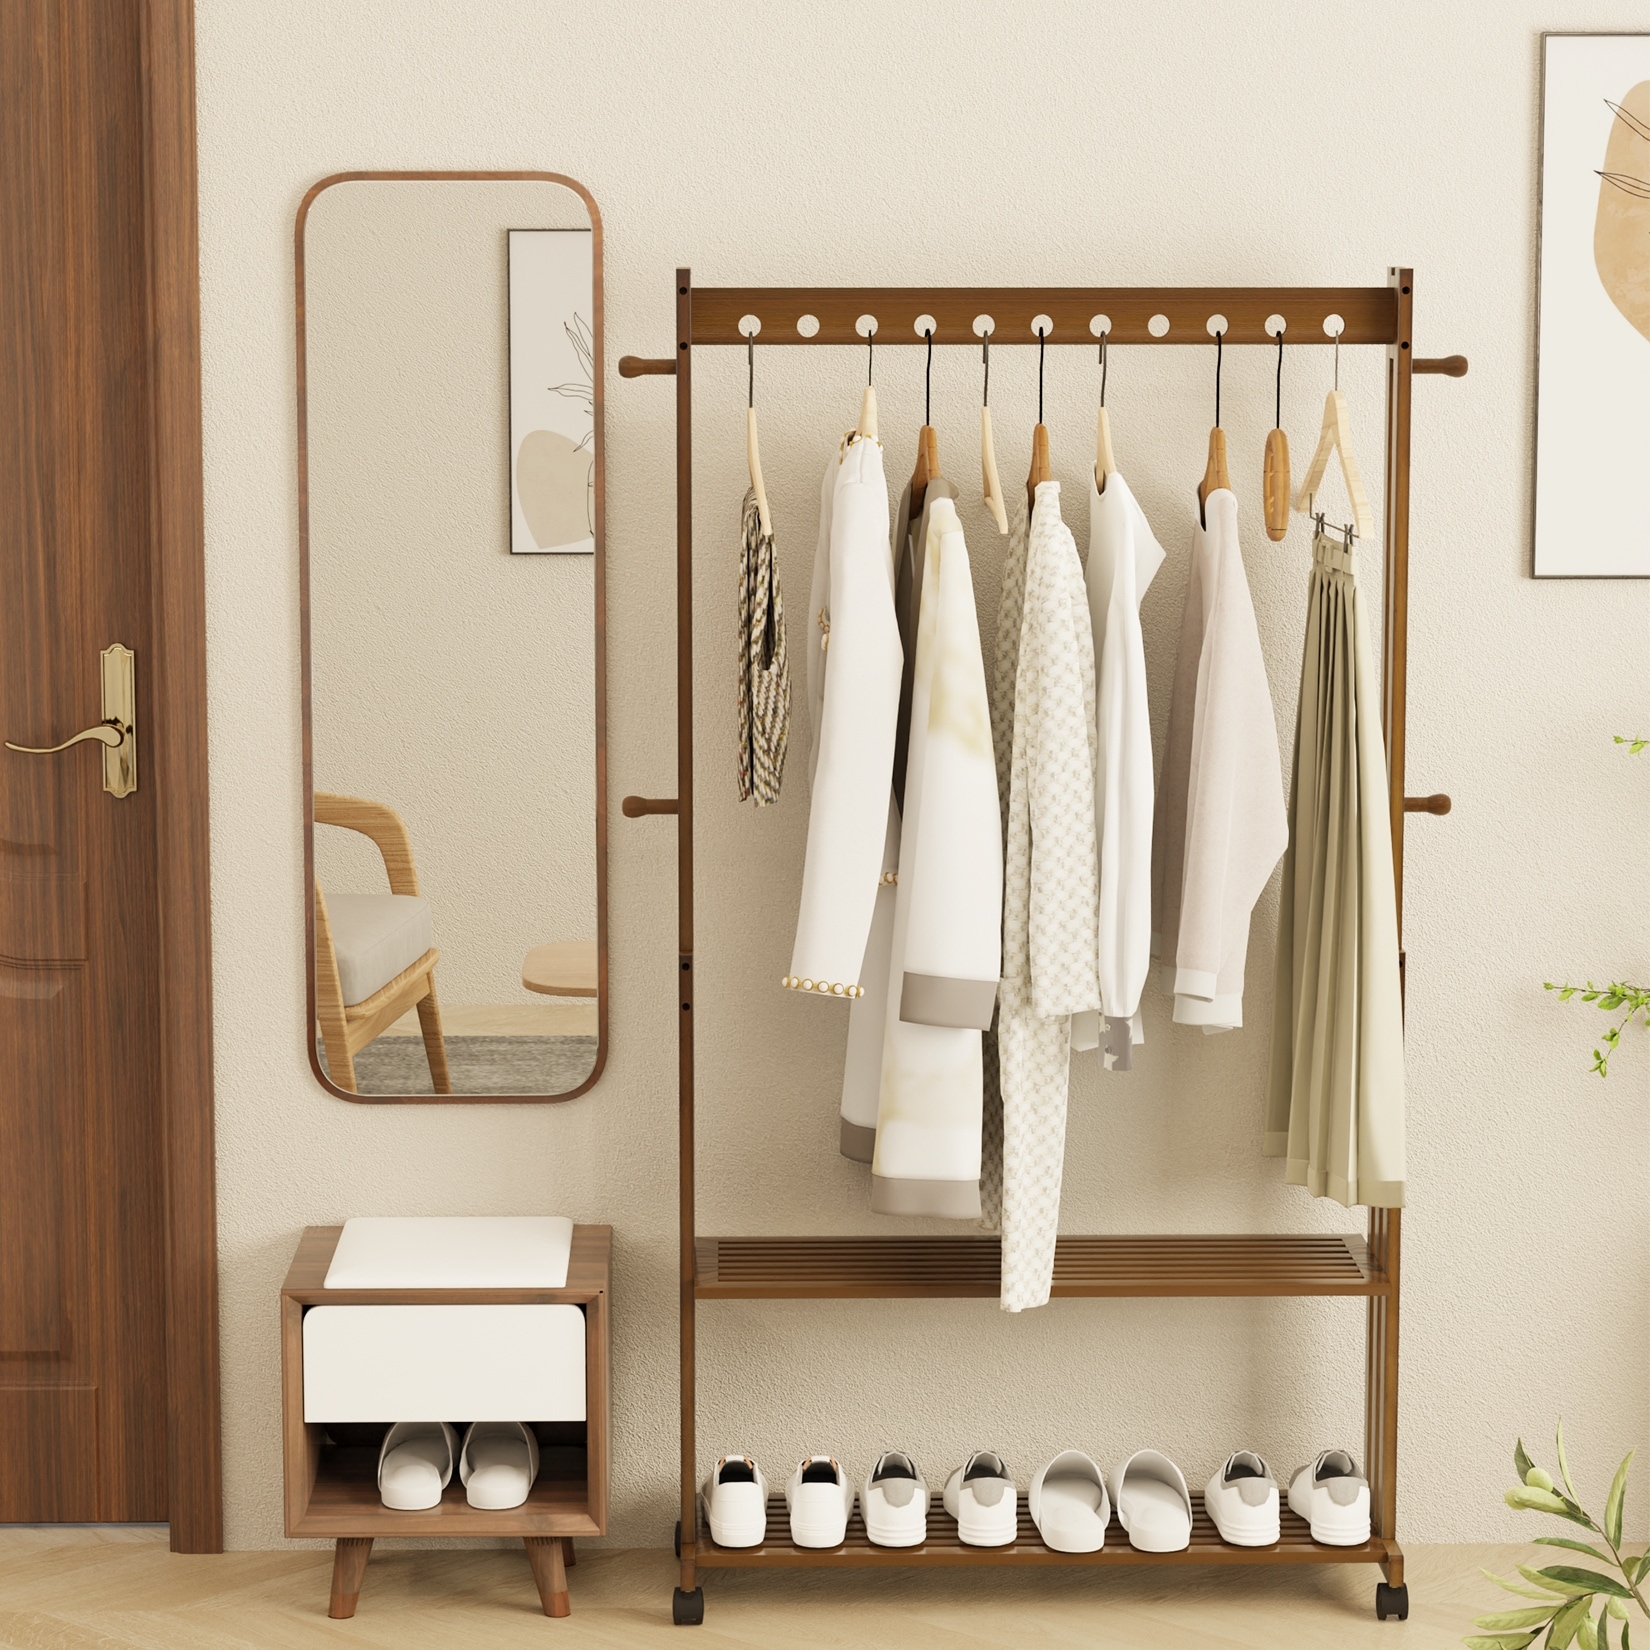 https://ak1.ostkcdn.com/images/products/is/images/direct/c78931404a92b03dbc862816a0e1c0957d08b2e7/Rustic-Wooden-Clothes-Rack-Freestanding-Bamboo-Garment-Stand-On-Wheels.jpg